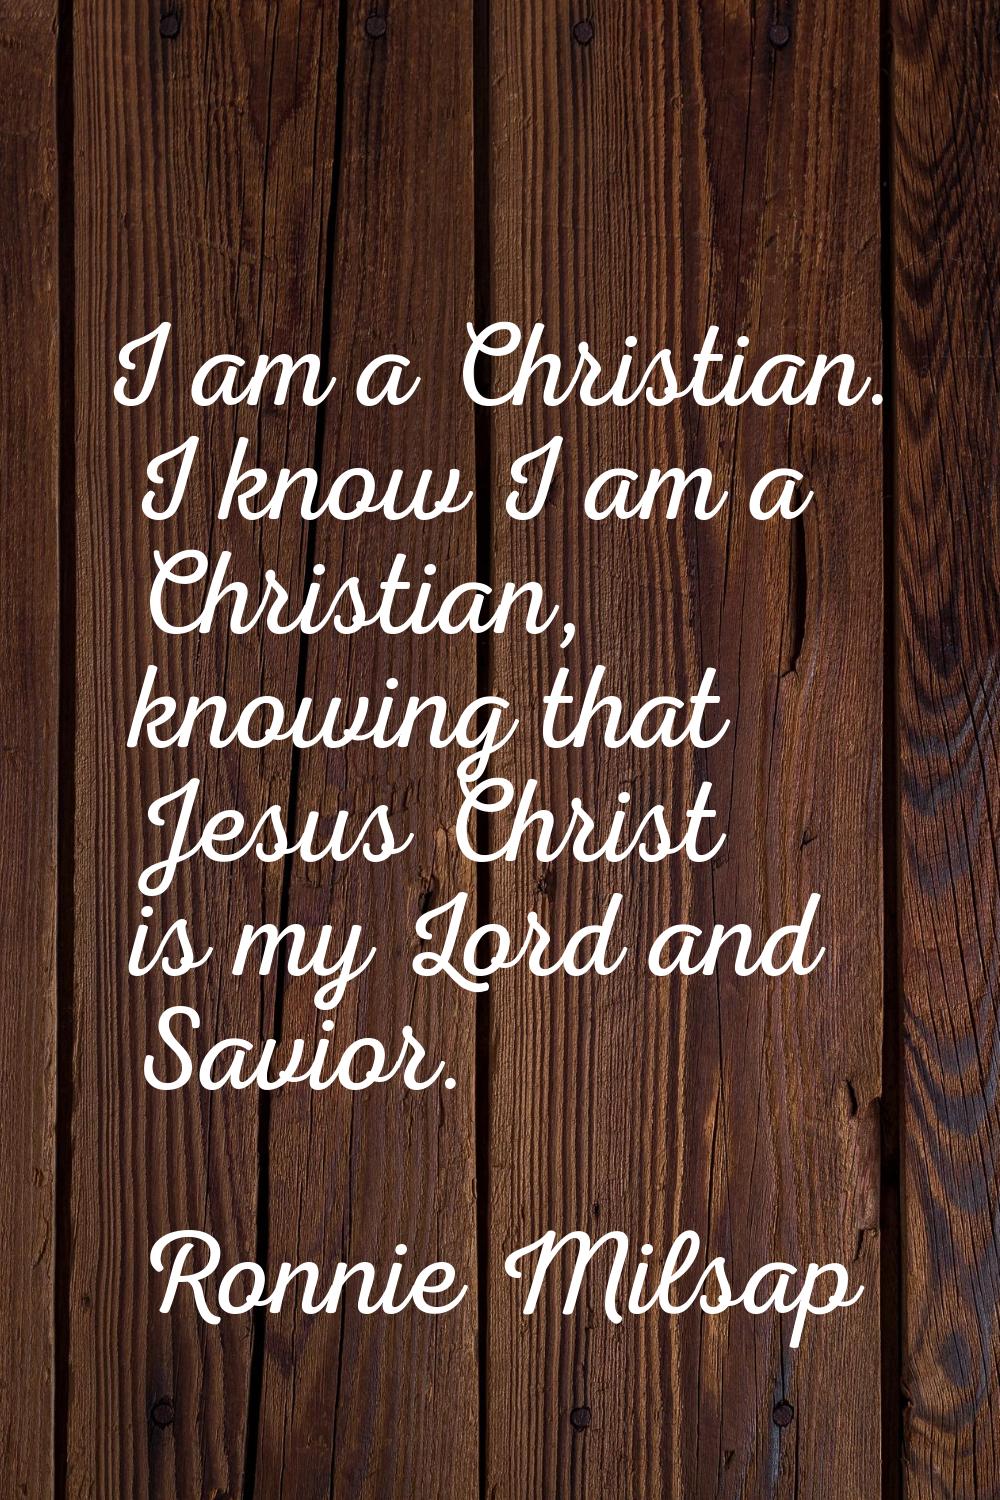 I am a Christian. I know I am a Christian, knowing that Jesus Christ is my Lord and Savior.